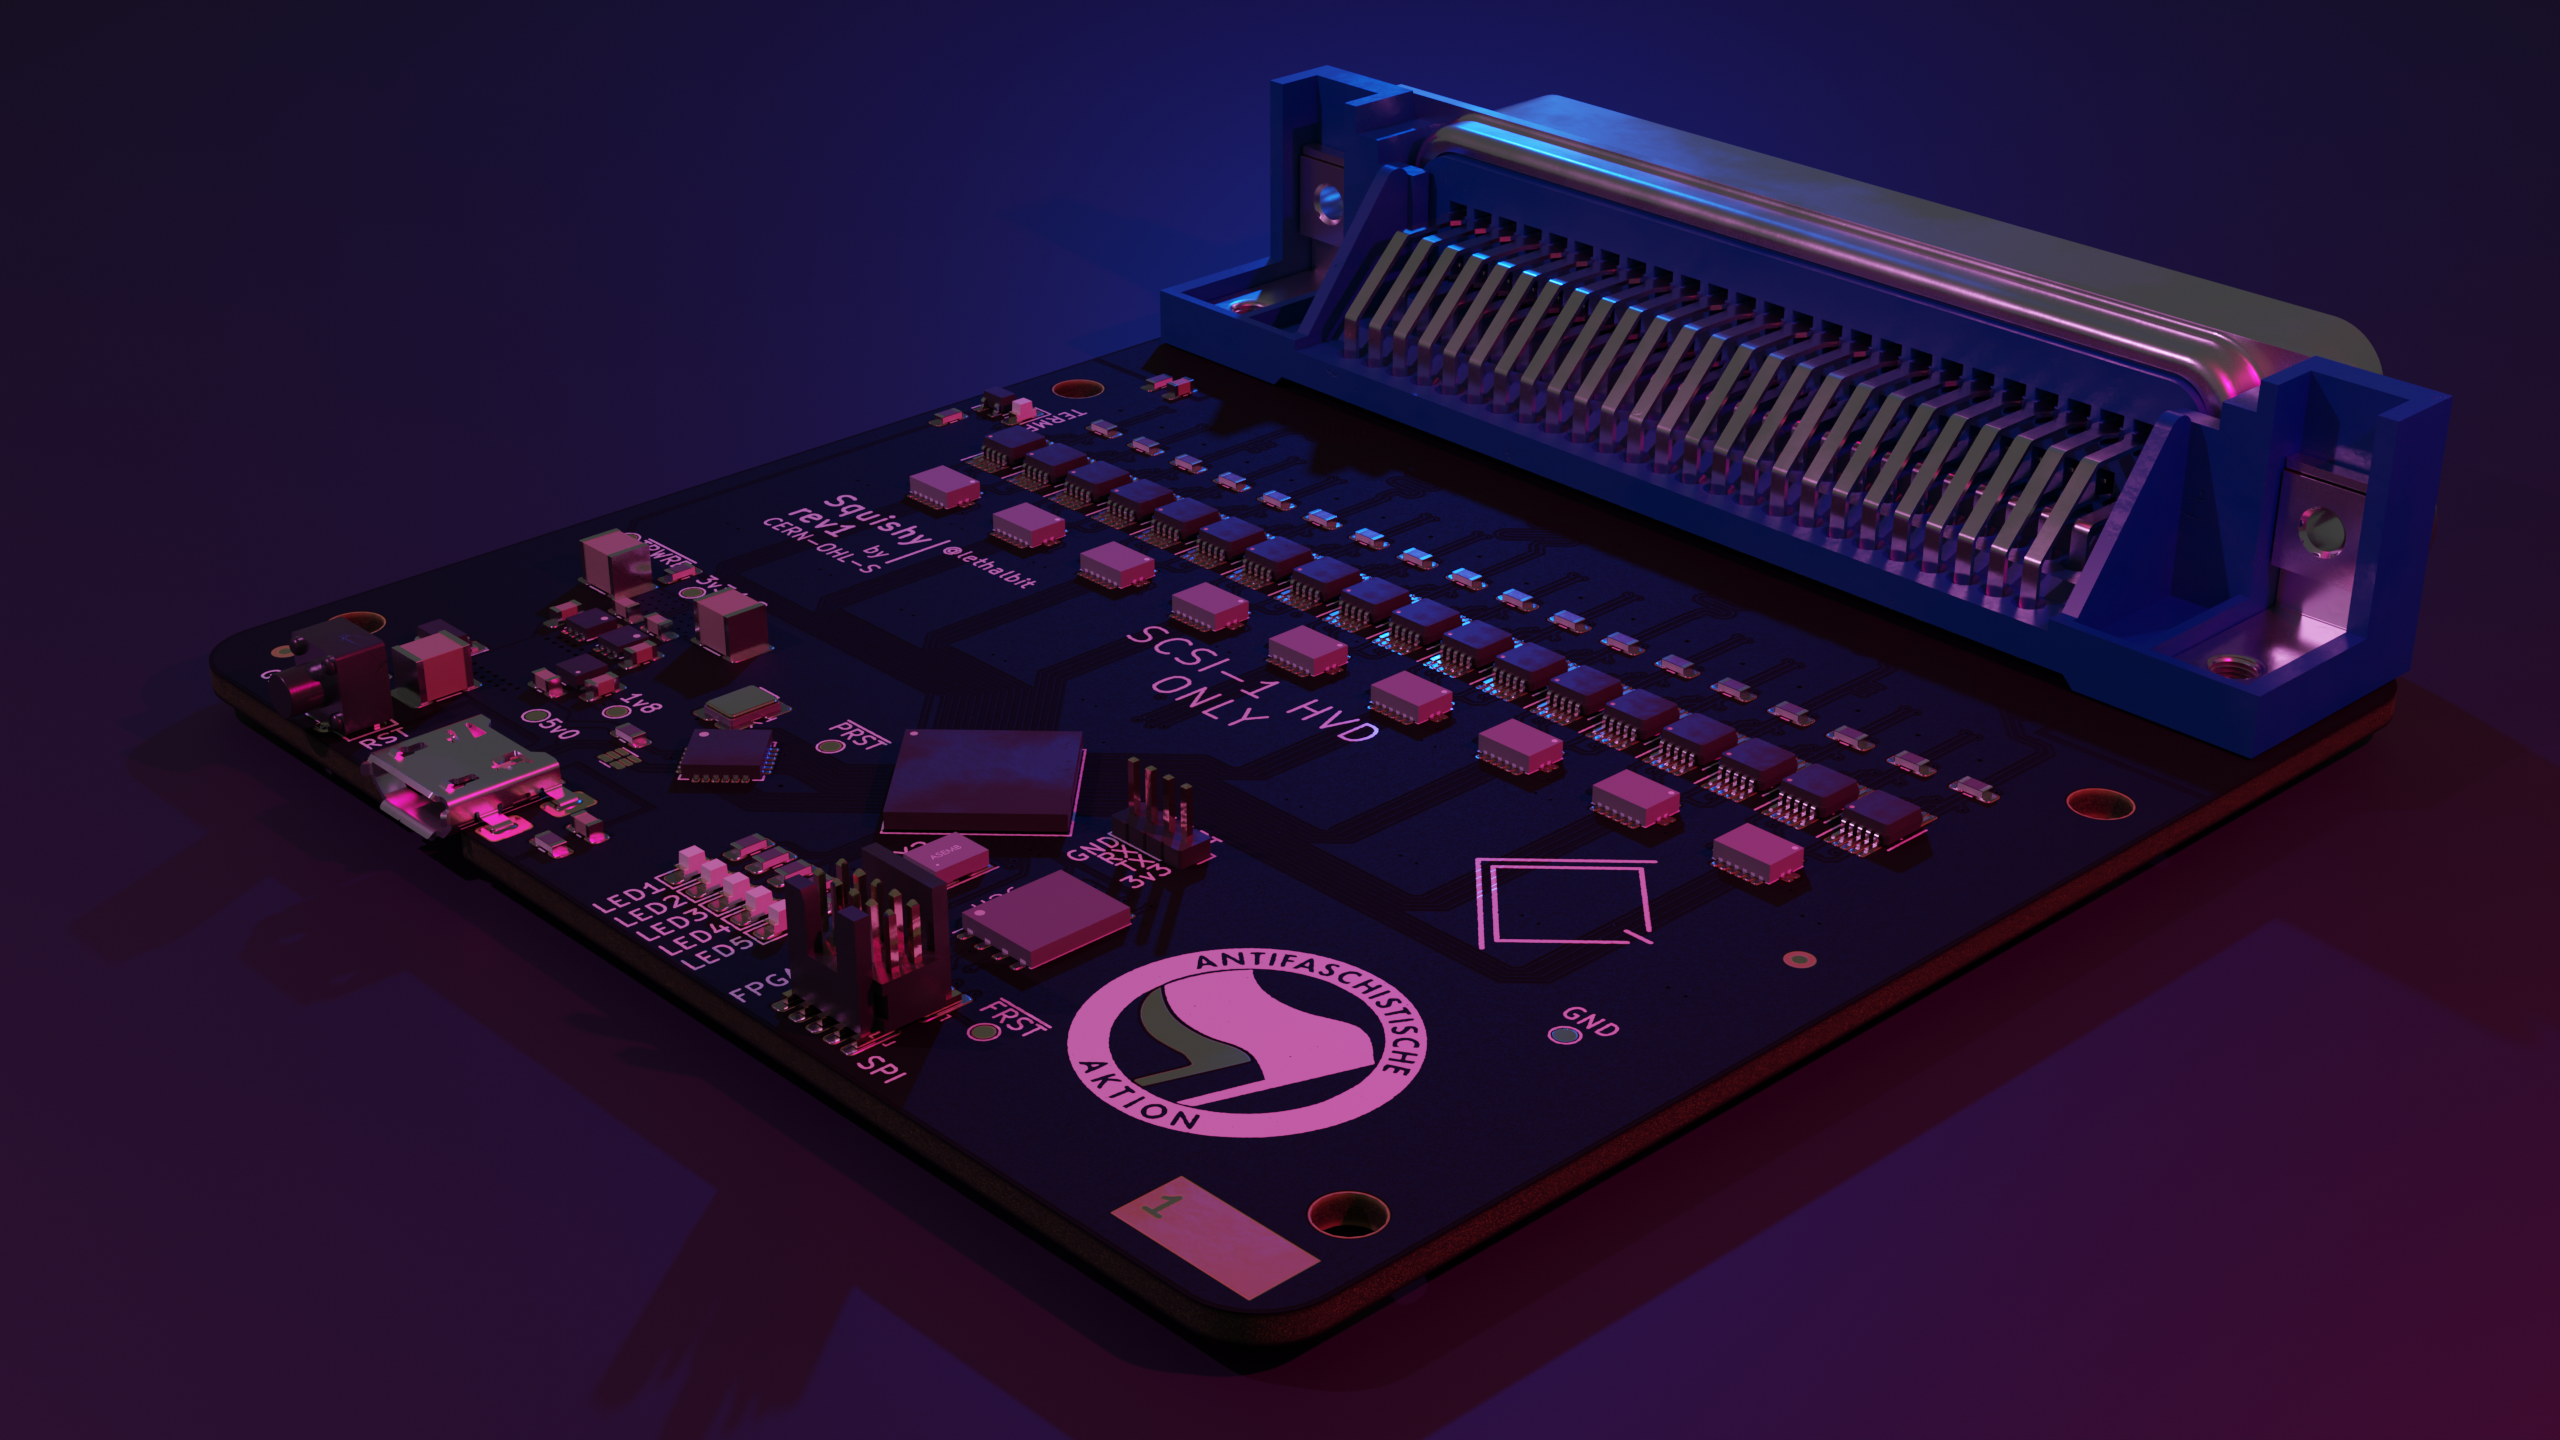 From KiCad To Blender For A Stunning Render